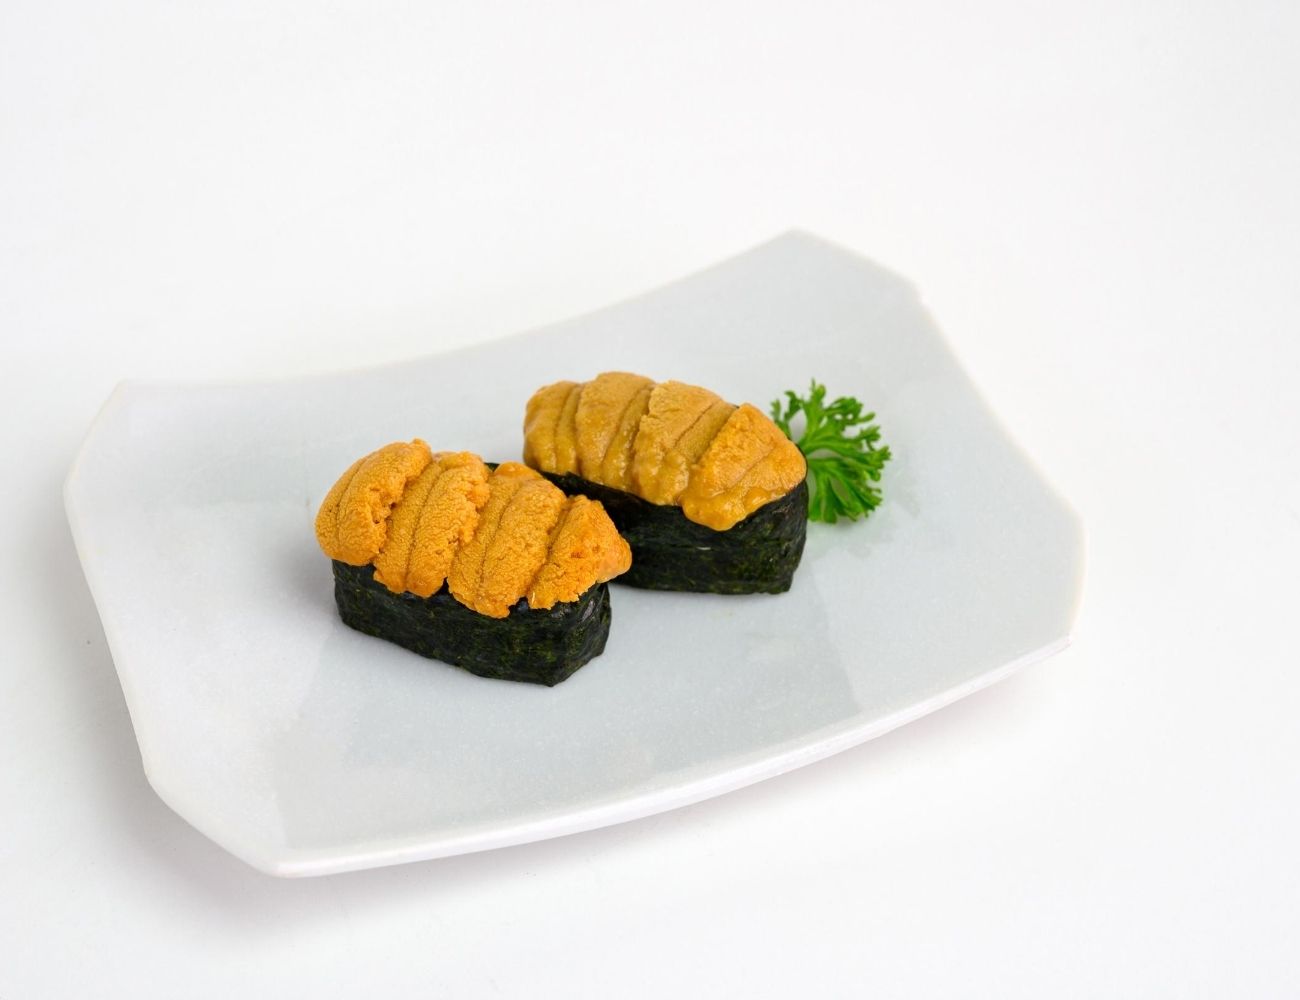 Uni; A Japanese Delicacy You Should Crave For More BC Live Spot Prawns & Seafood